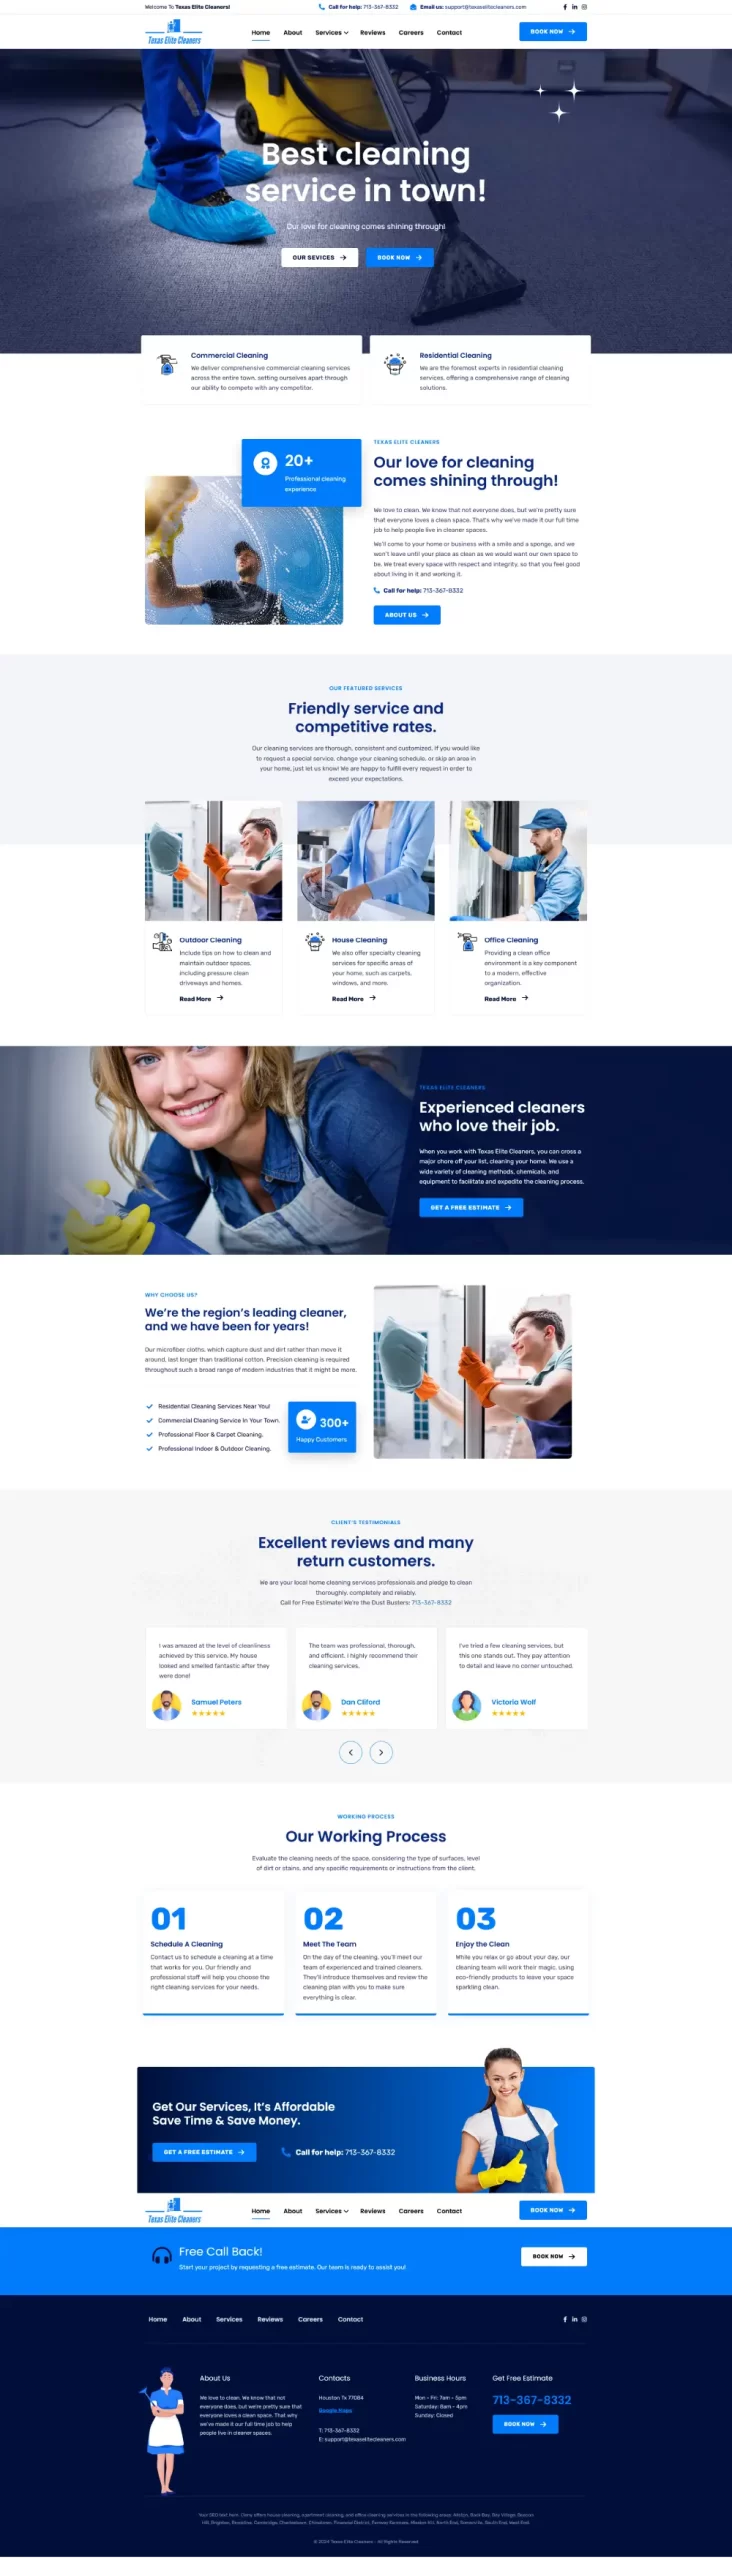 Home-Texas-Elite-Cleaners-scaled.webp